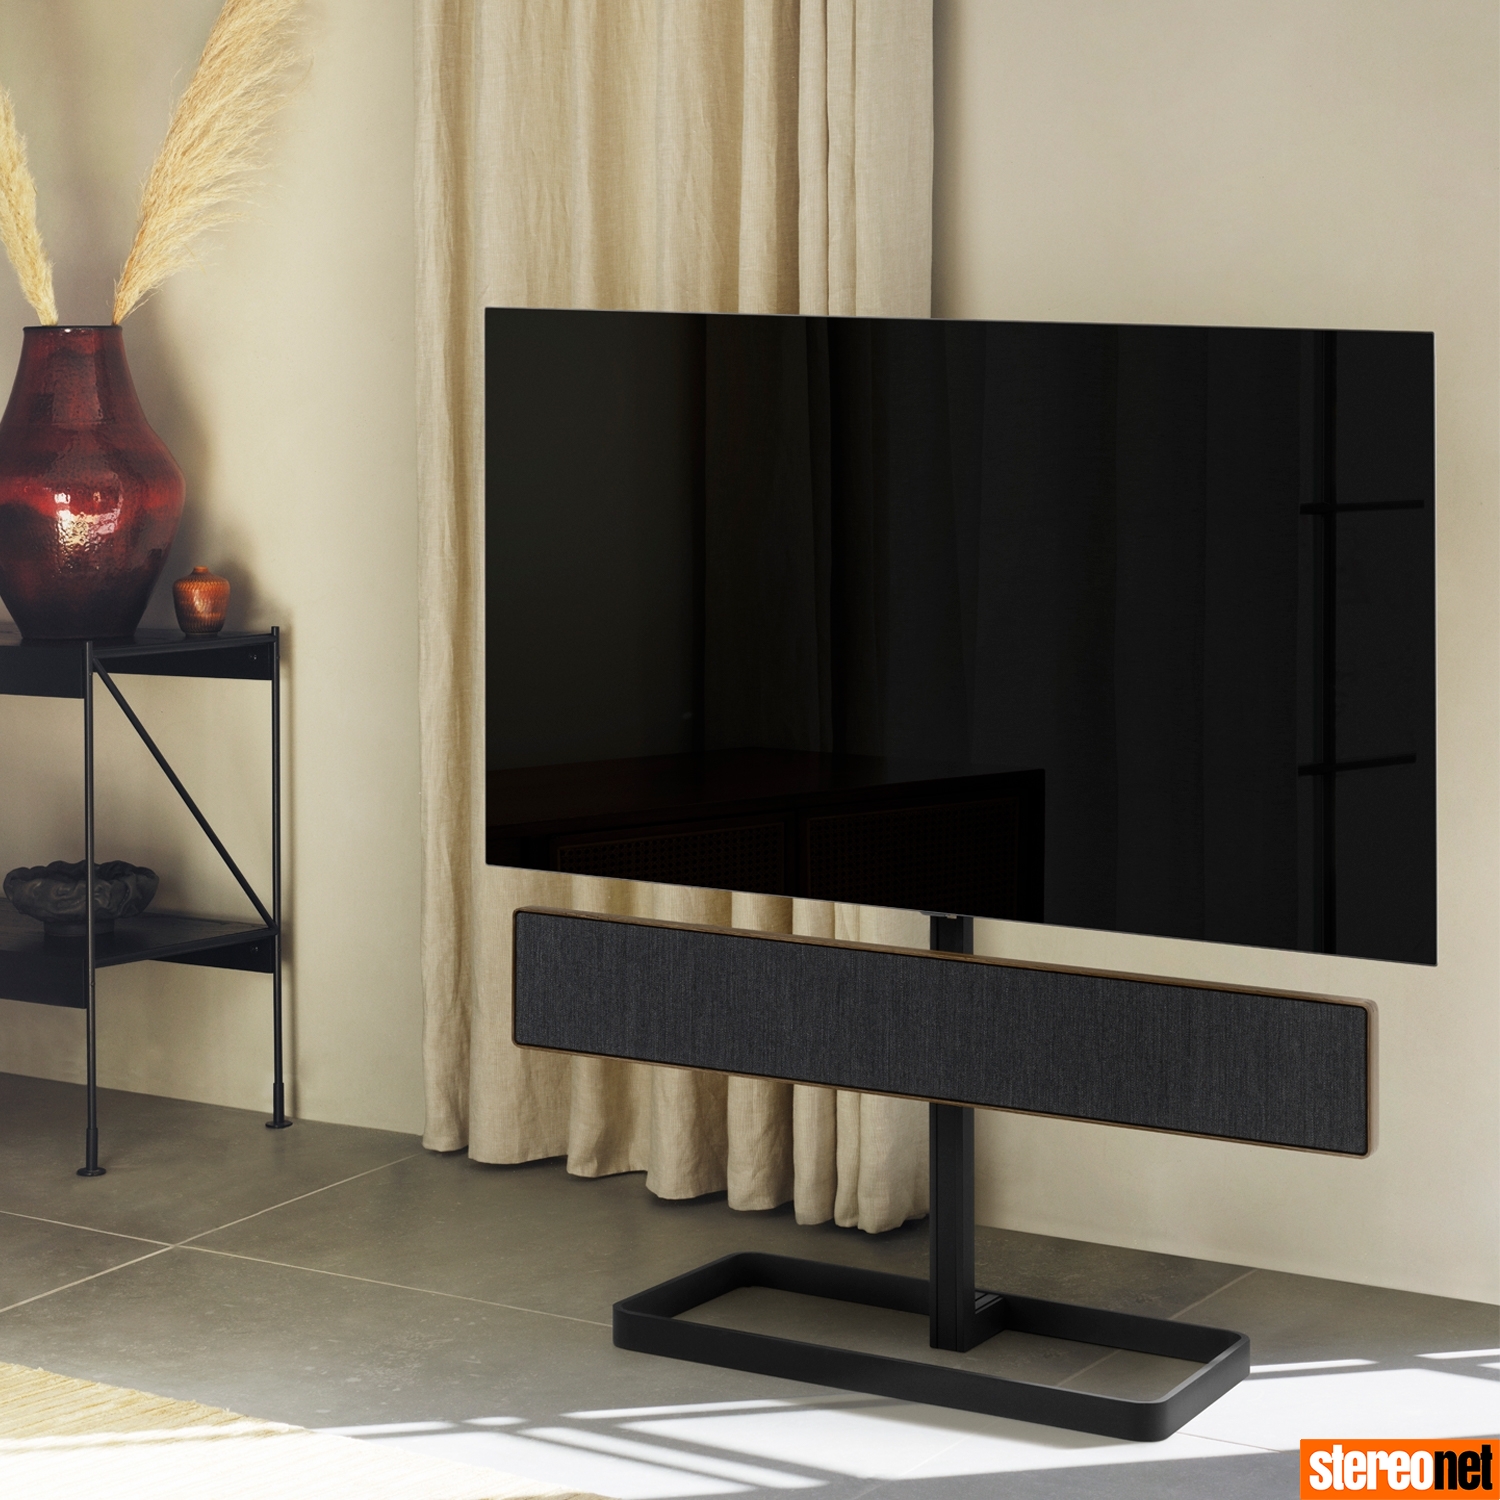 B&O Beosound Stage, Stand and LG TV Deal